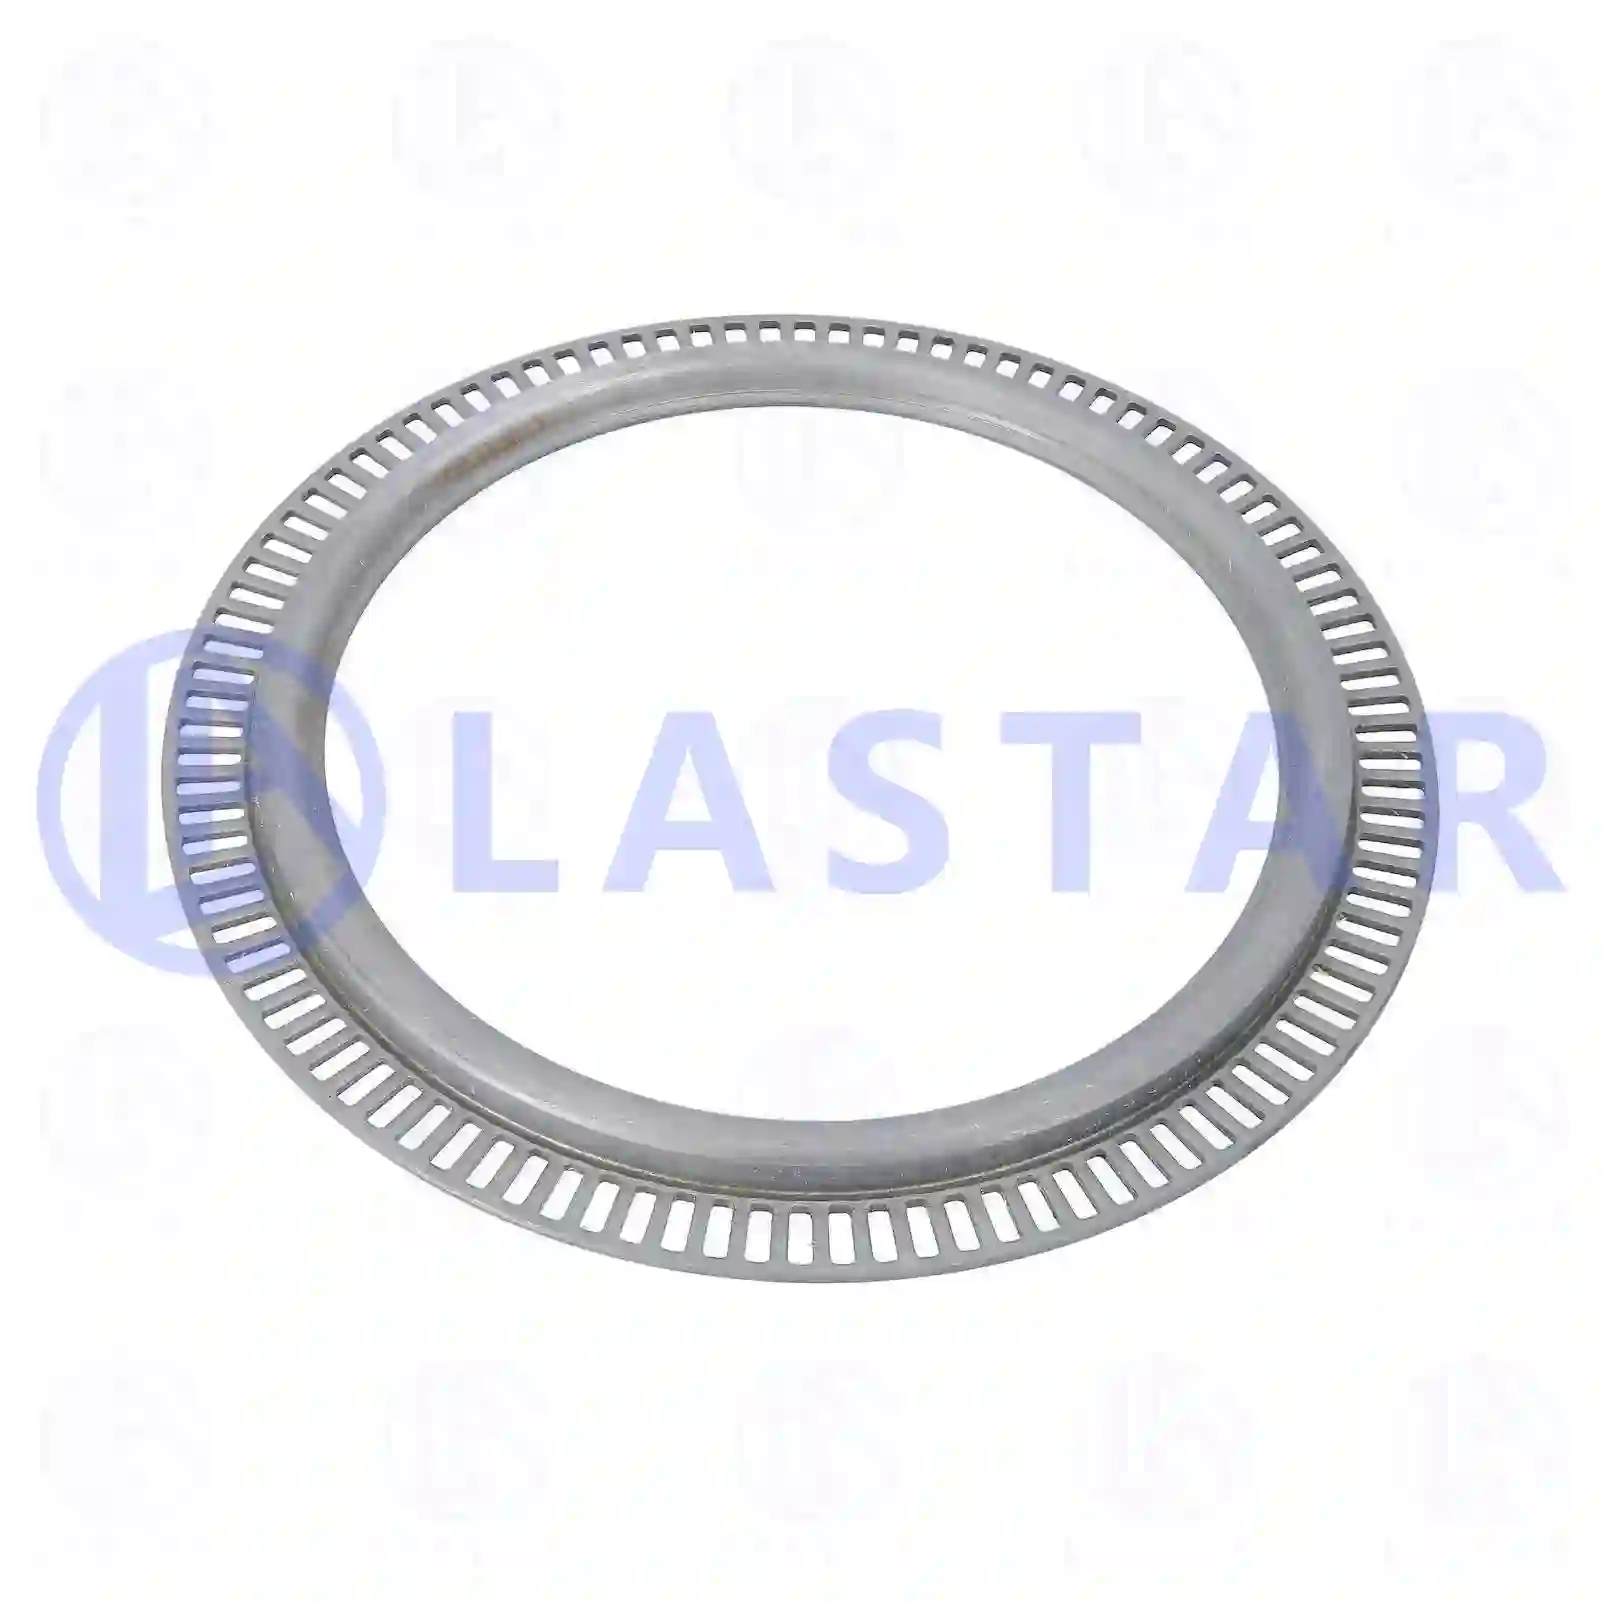 ABS ring, 77726345, 9423560515, , , ||  77726345 Lastar Spare Part | Truck Spare Parts, Auotomotive Spare Parts ABS ring, 77726345, 9423560515, , , ||  77726345 Lastar Spare Part | Truck Spare Parts, Auotomotive Spare Parts